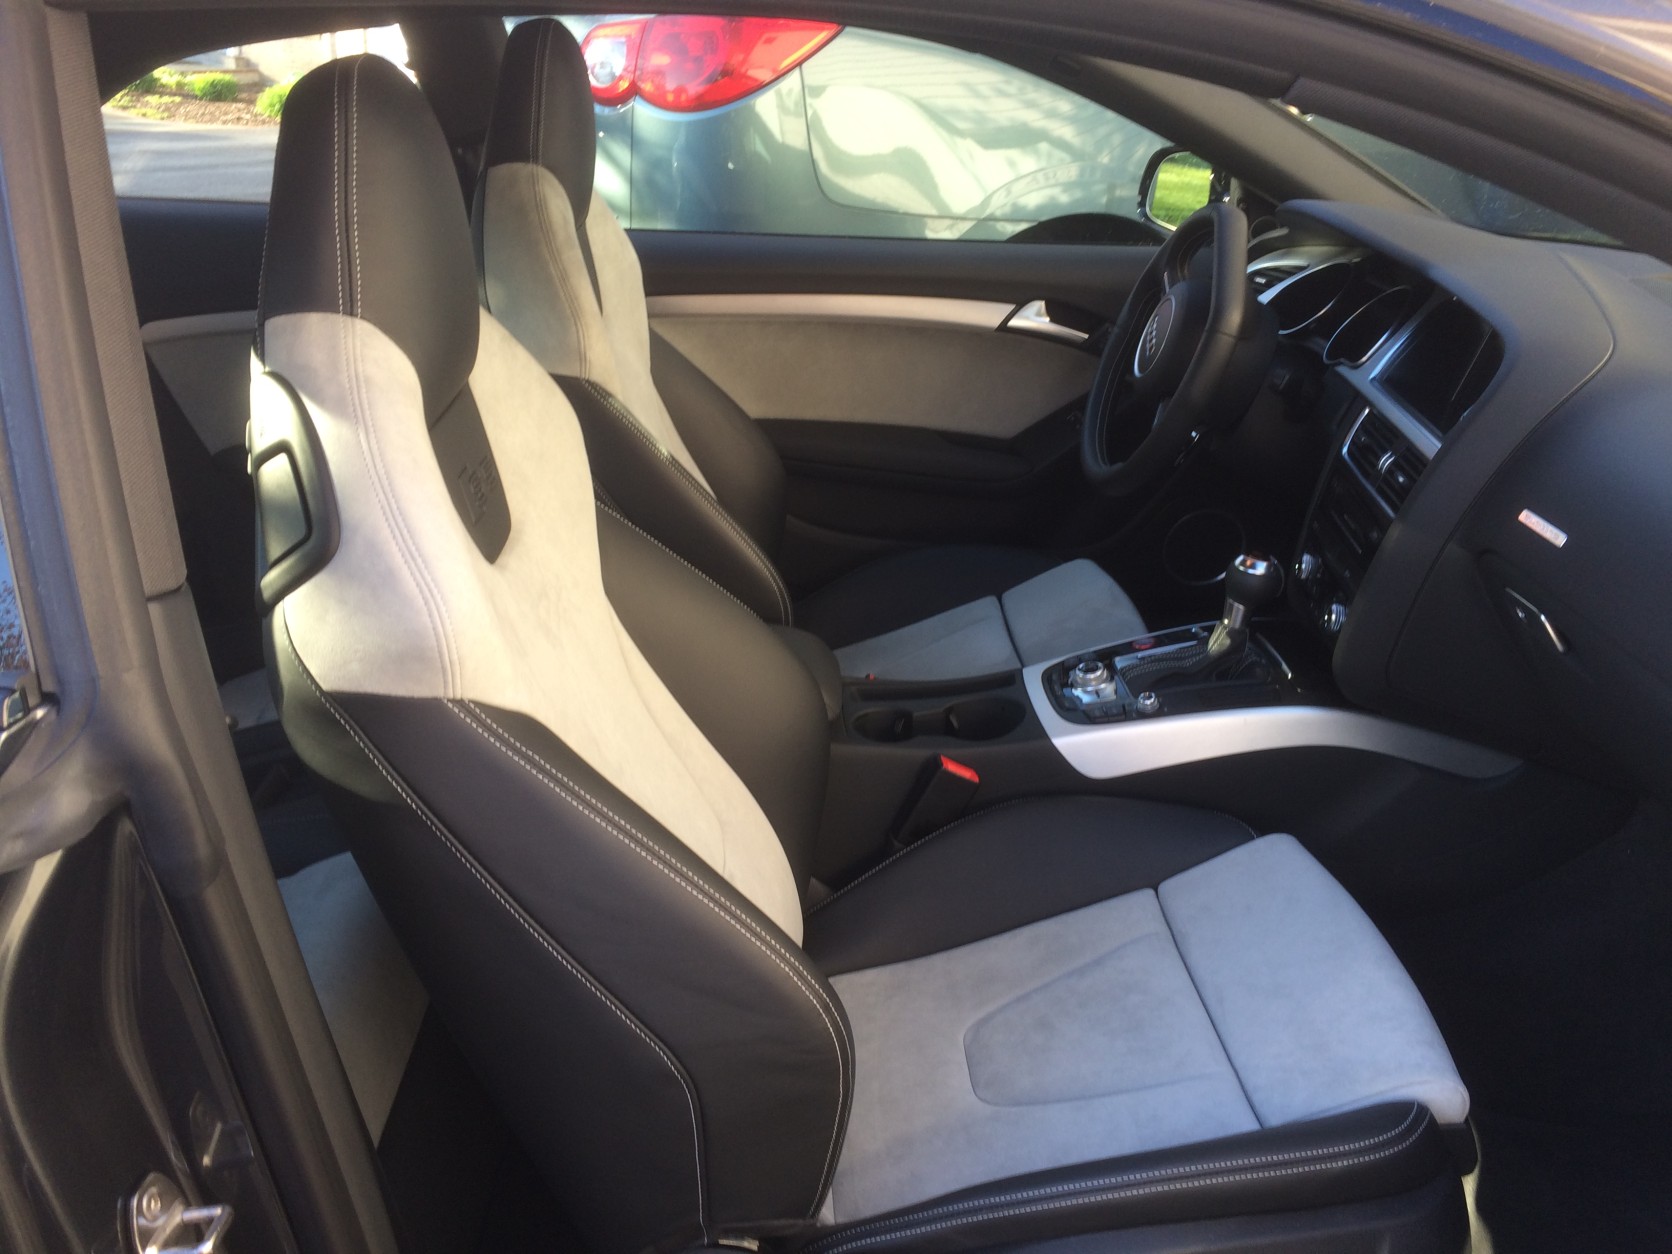 The front seats are leather with good-looking Alcantara inserts. (WTOP/Mike Parris)